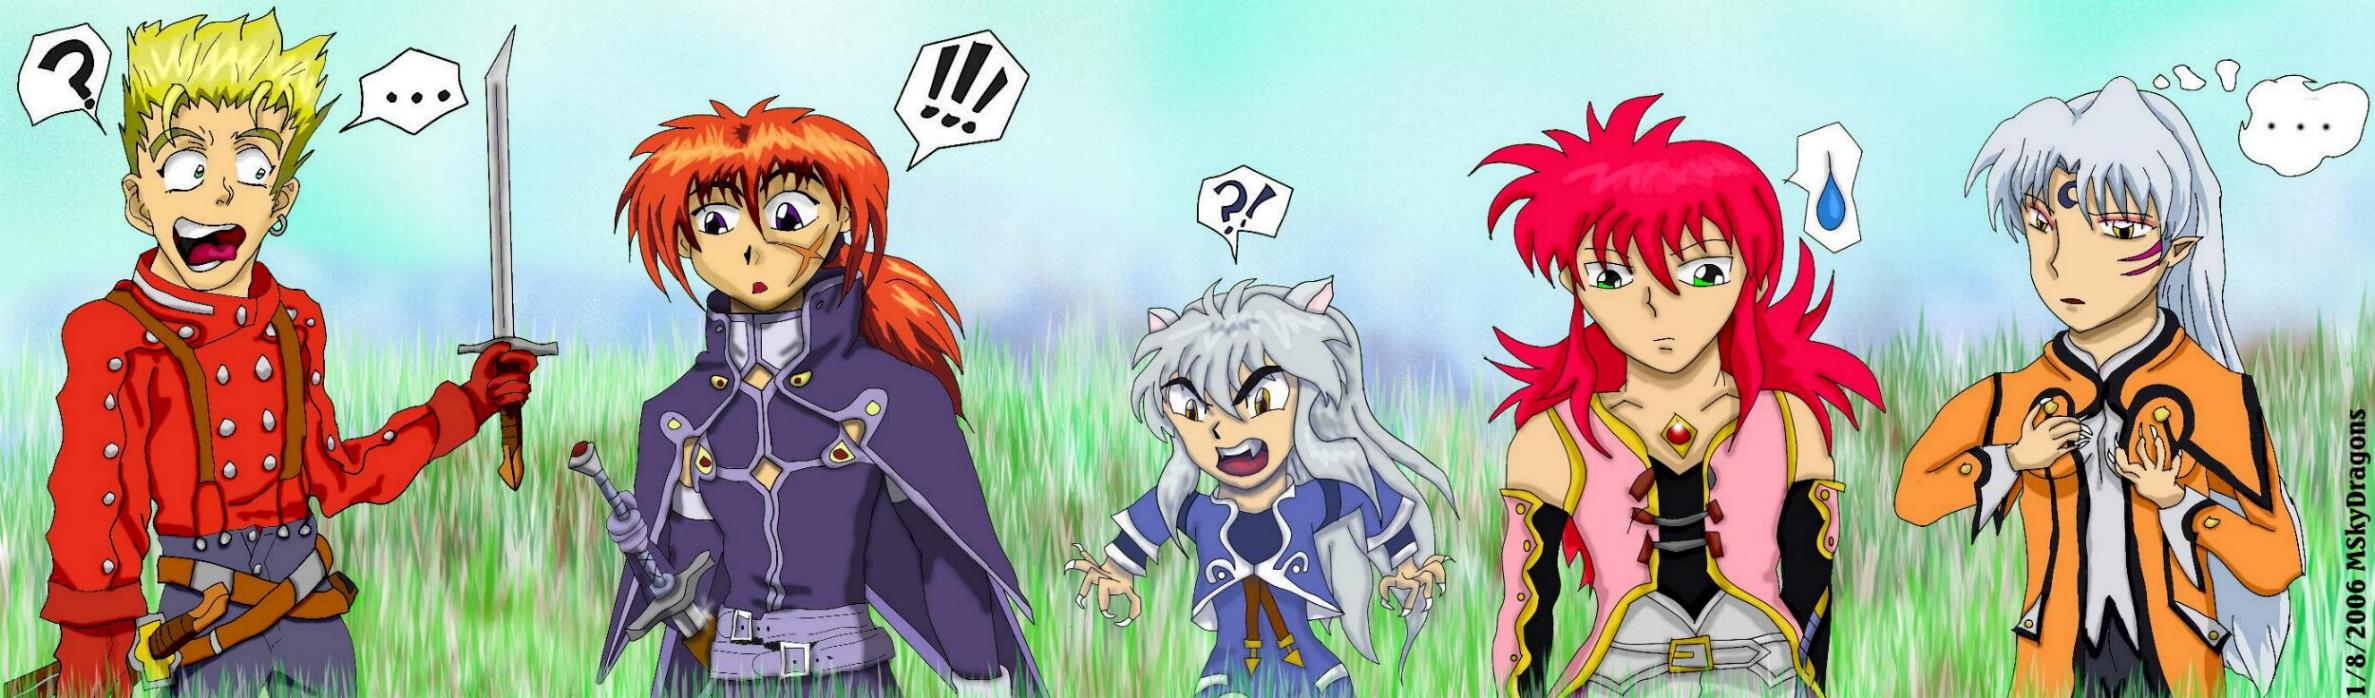 Symphonia  & Anime Character Swap by MSkyDragons